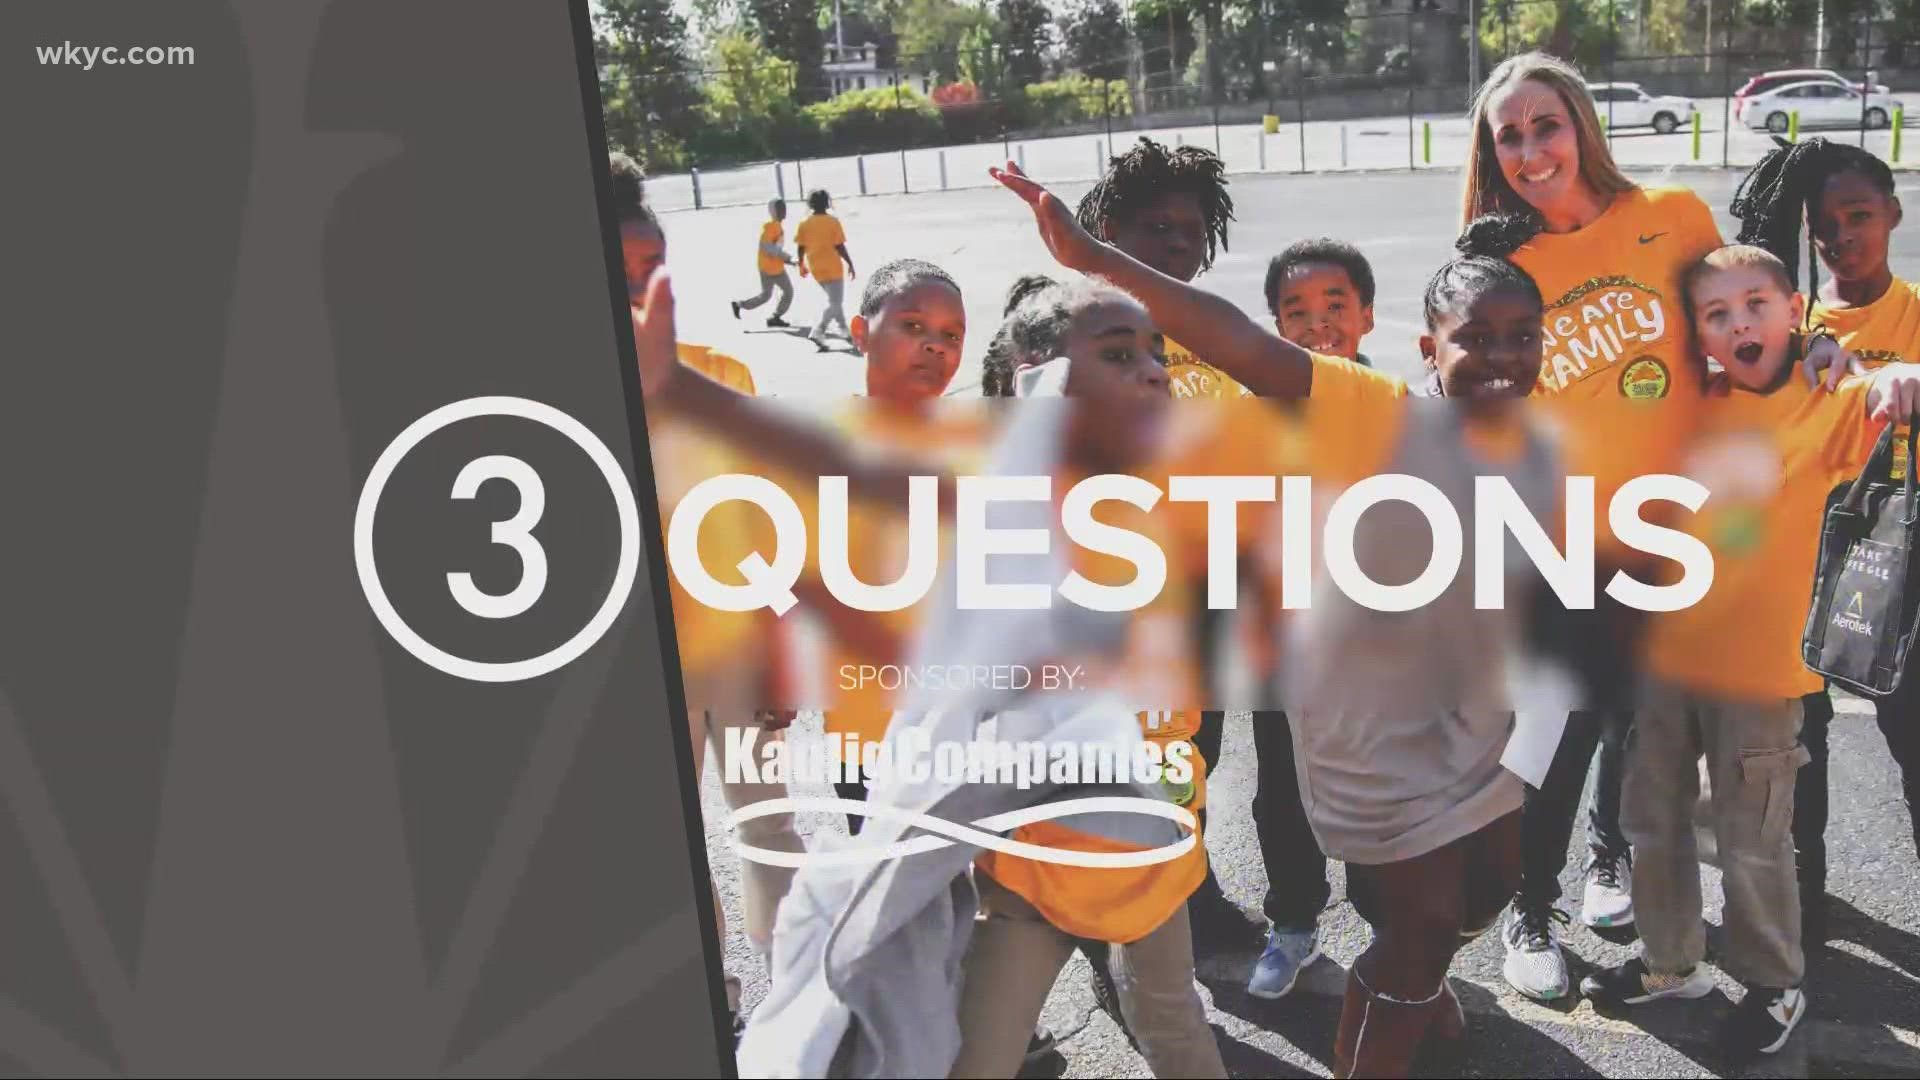 3 Questions From The I Promise School is a new segment airing on What's New every Friday!